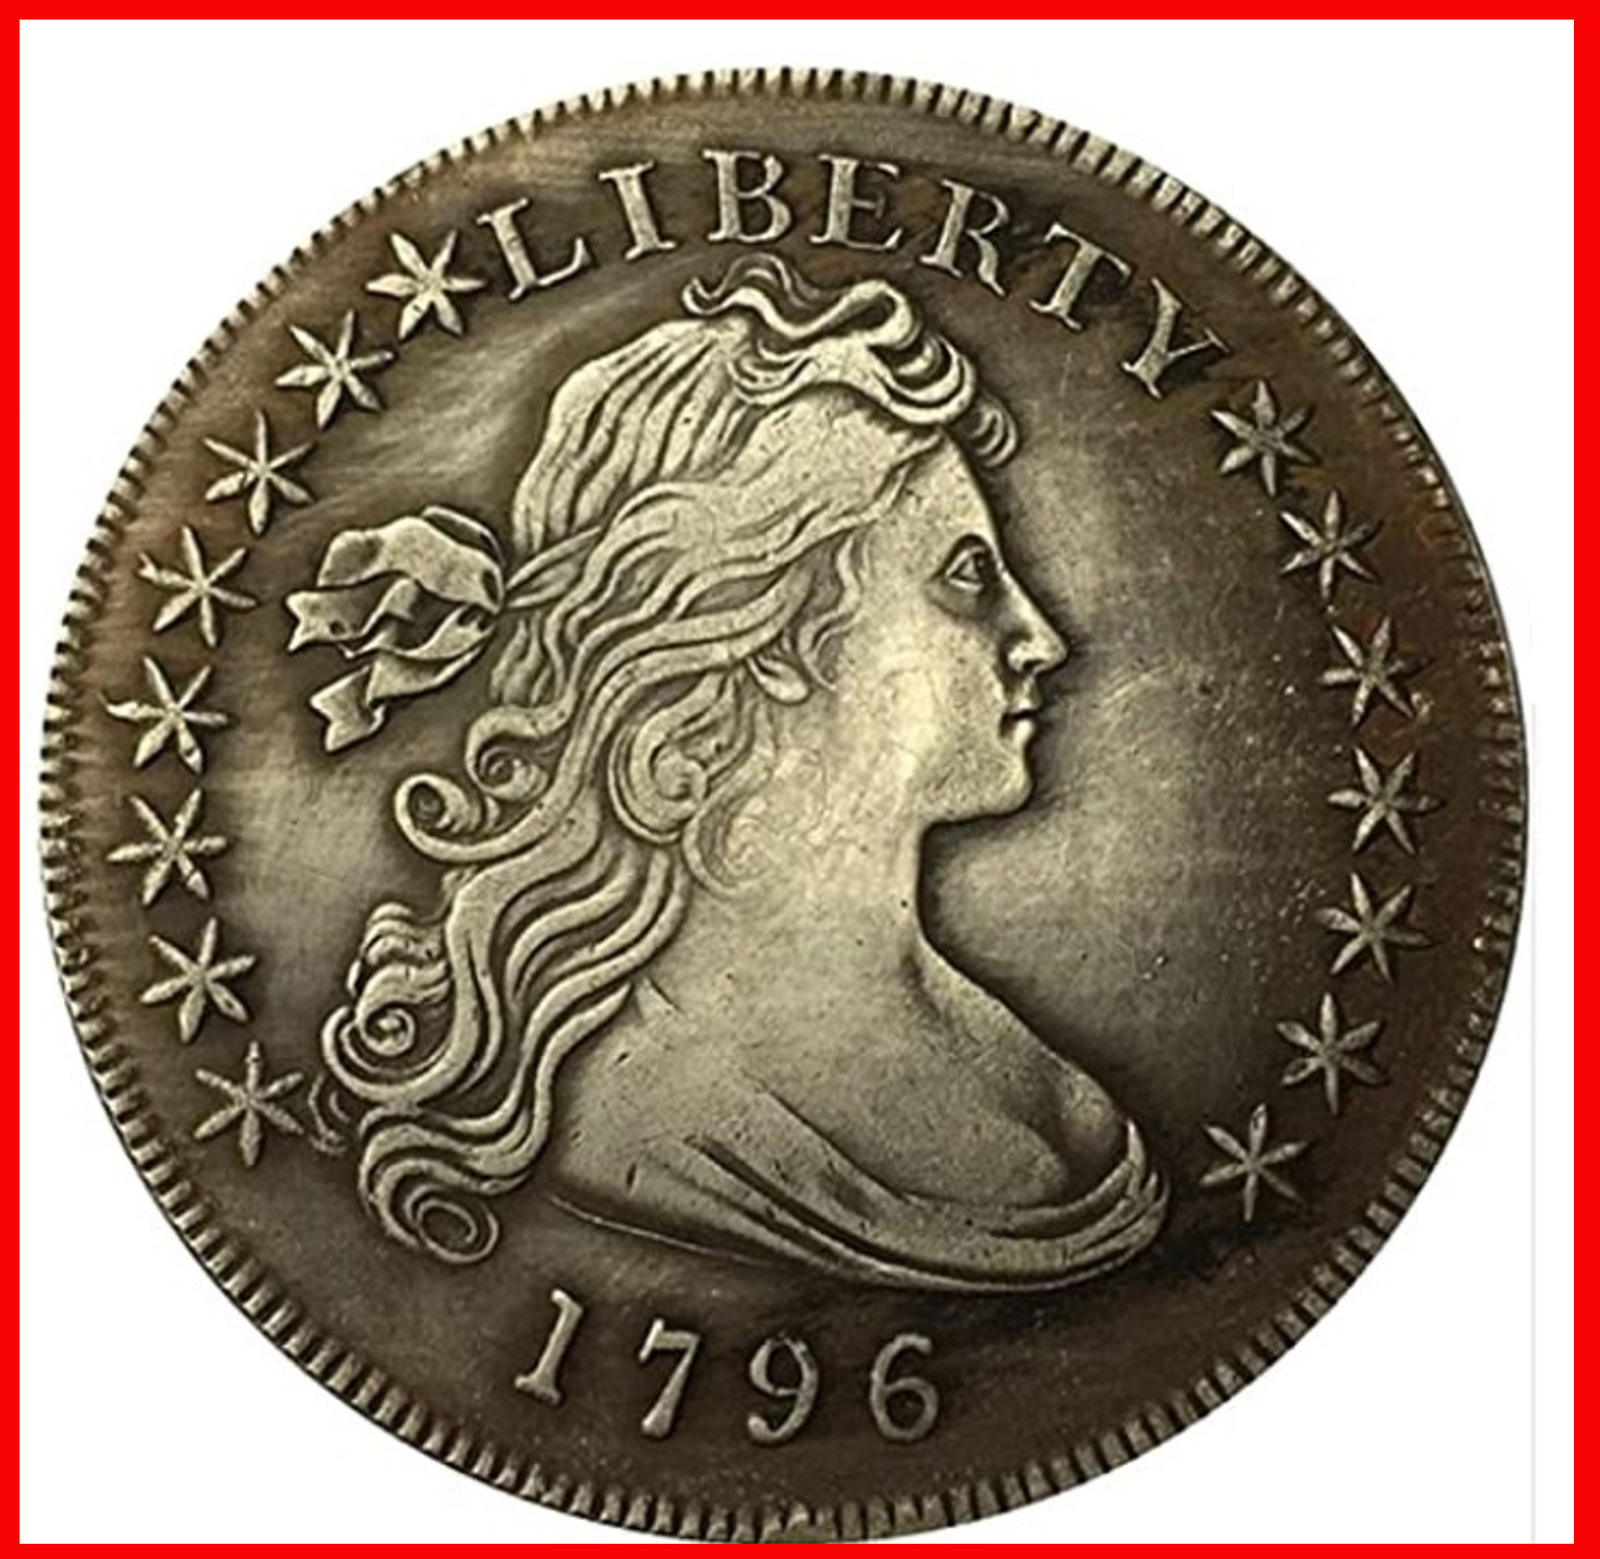 are old coins worth money